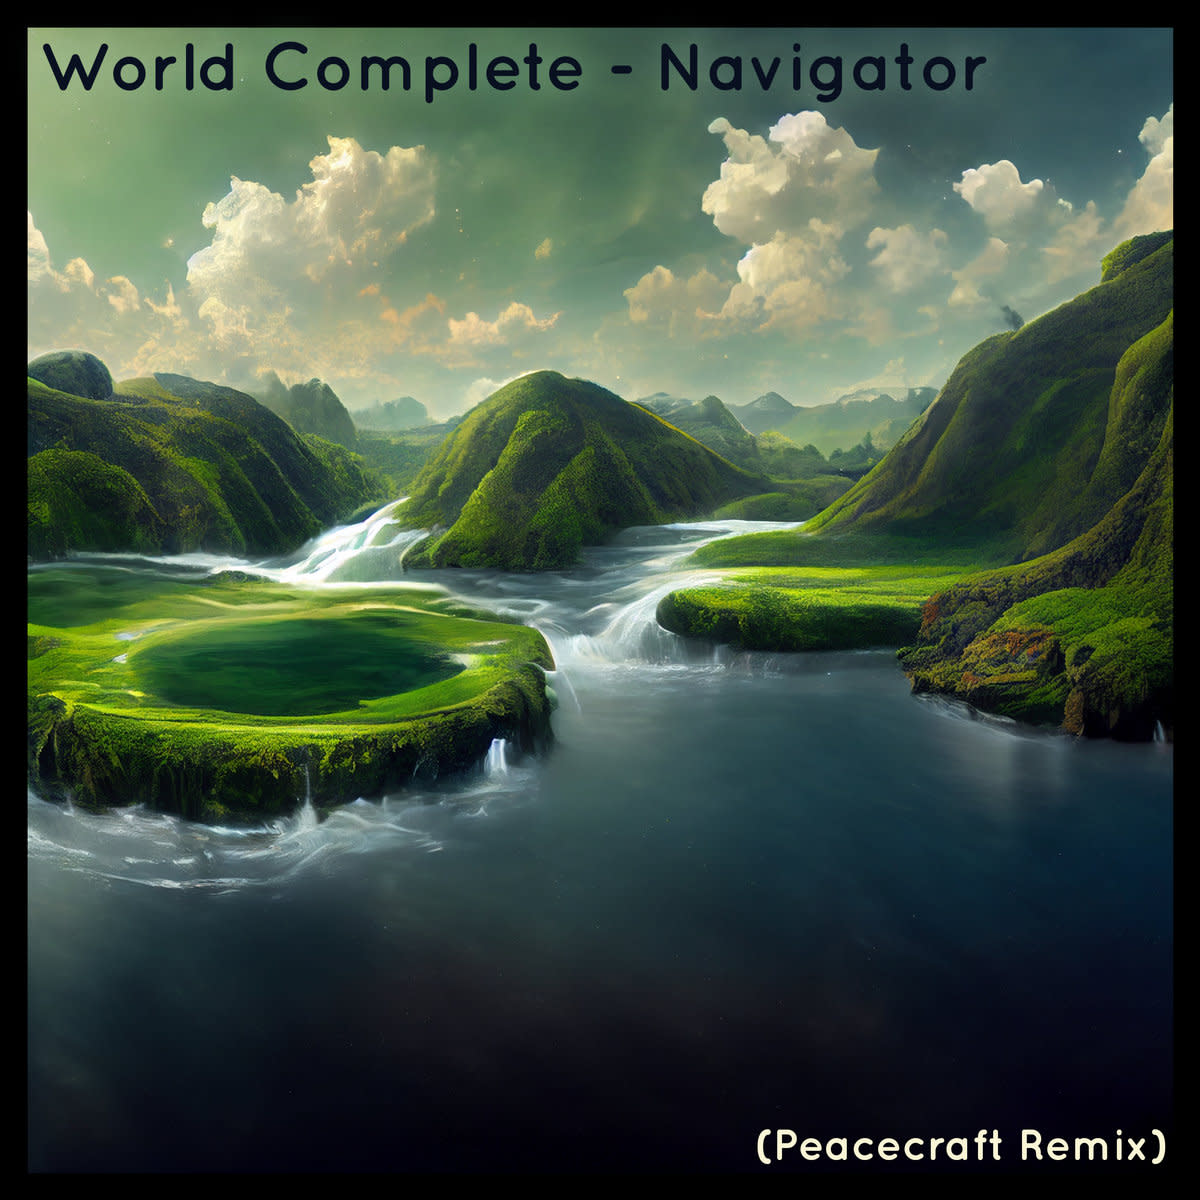 lo-fi-single-review-world-complete-navigator-remix-by-peacecraft